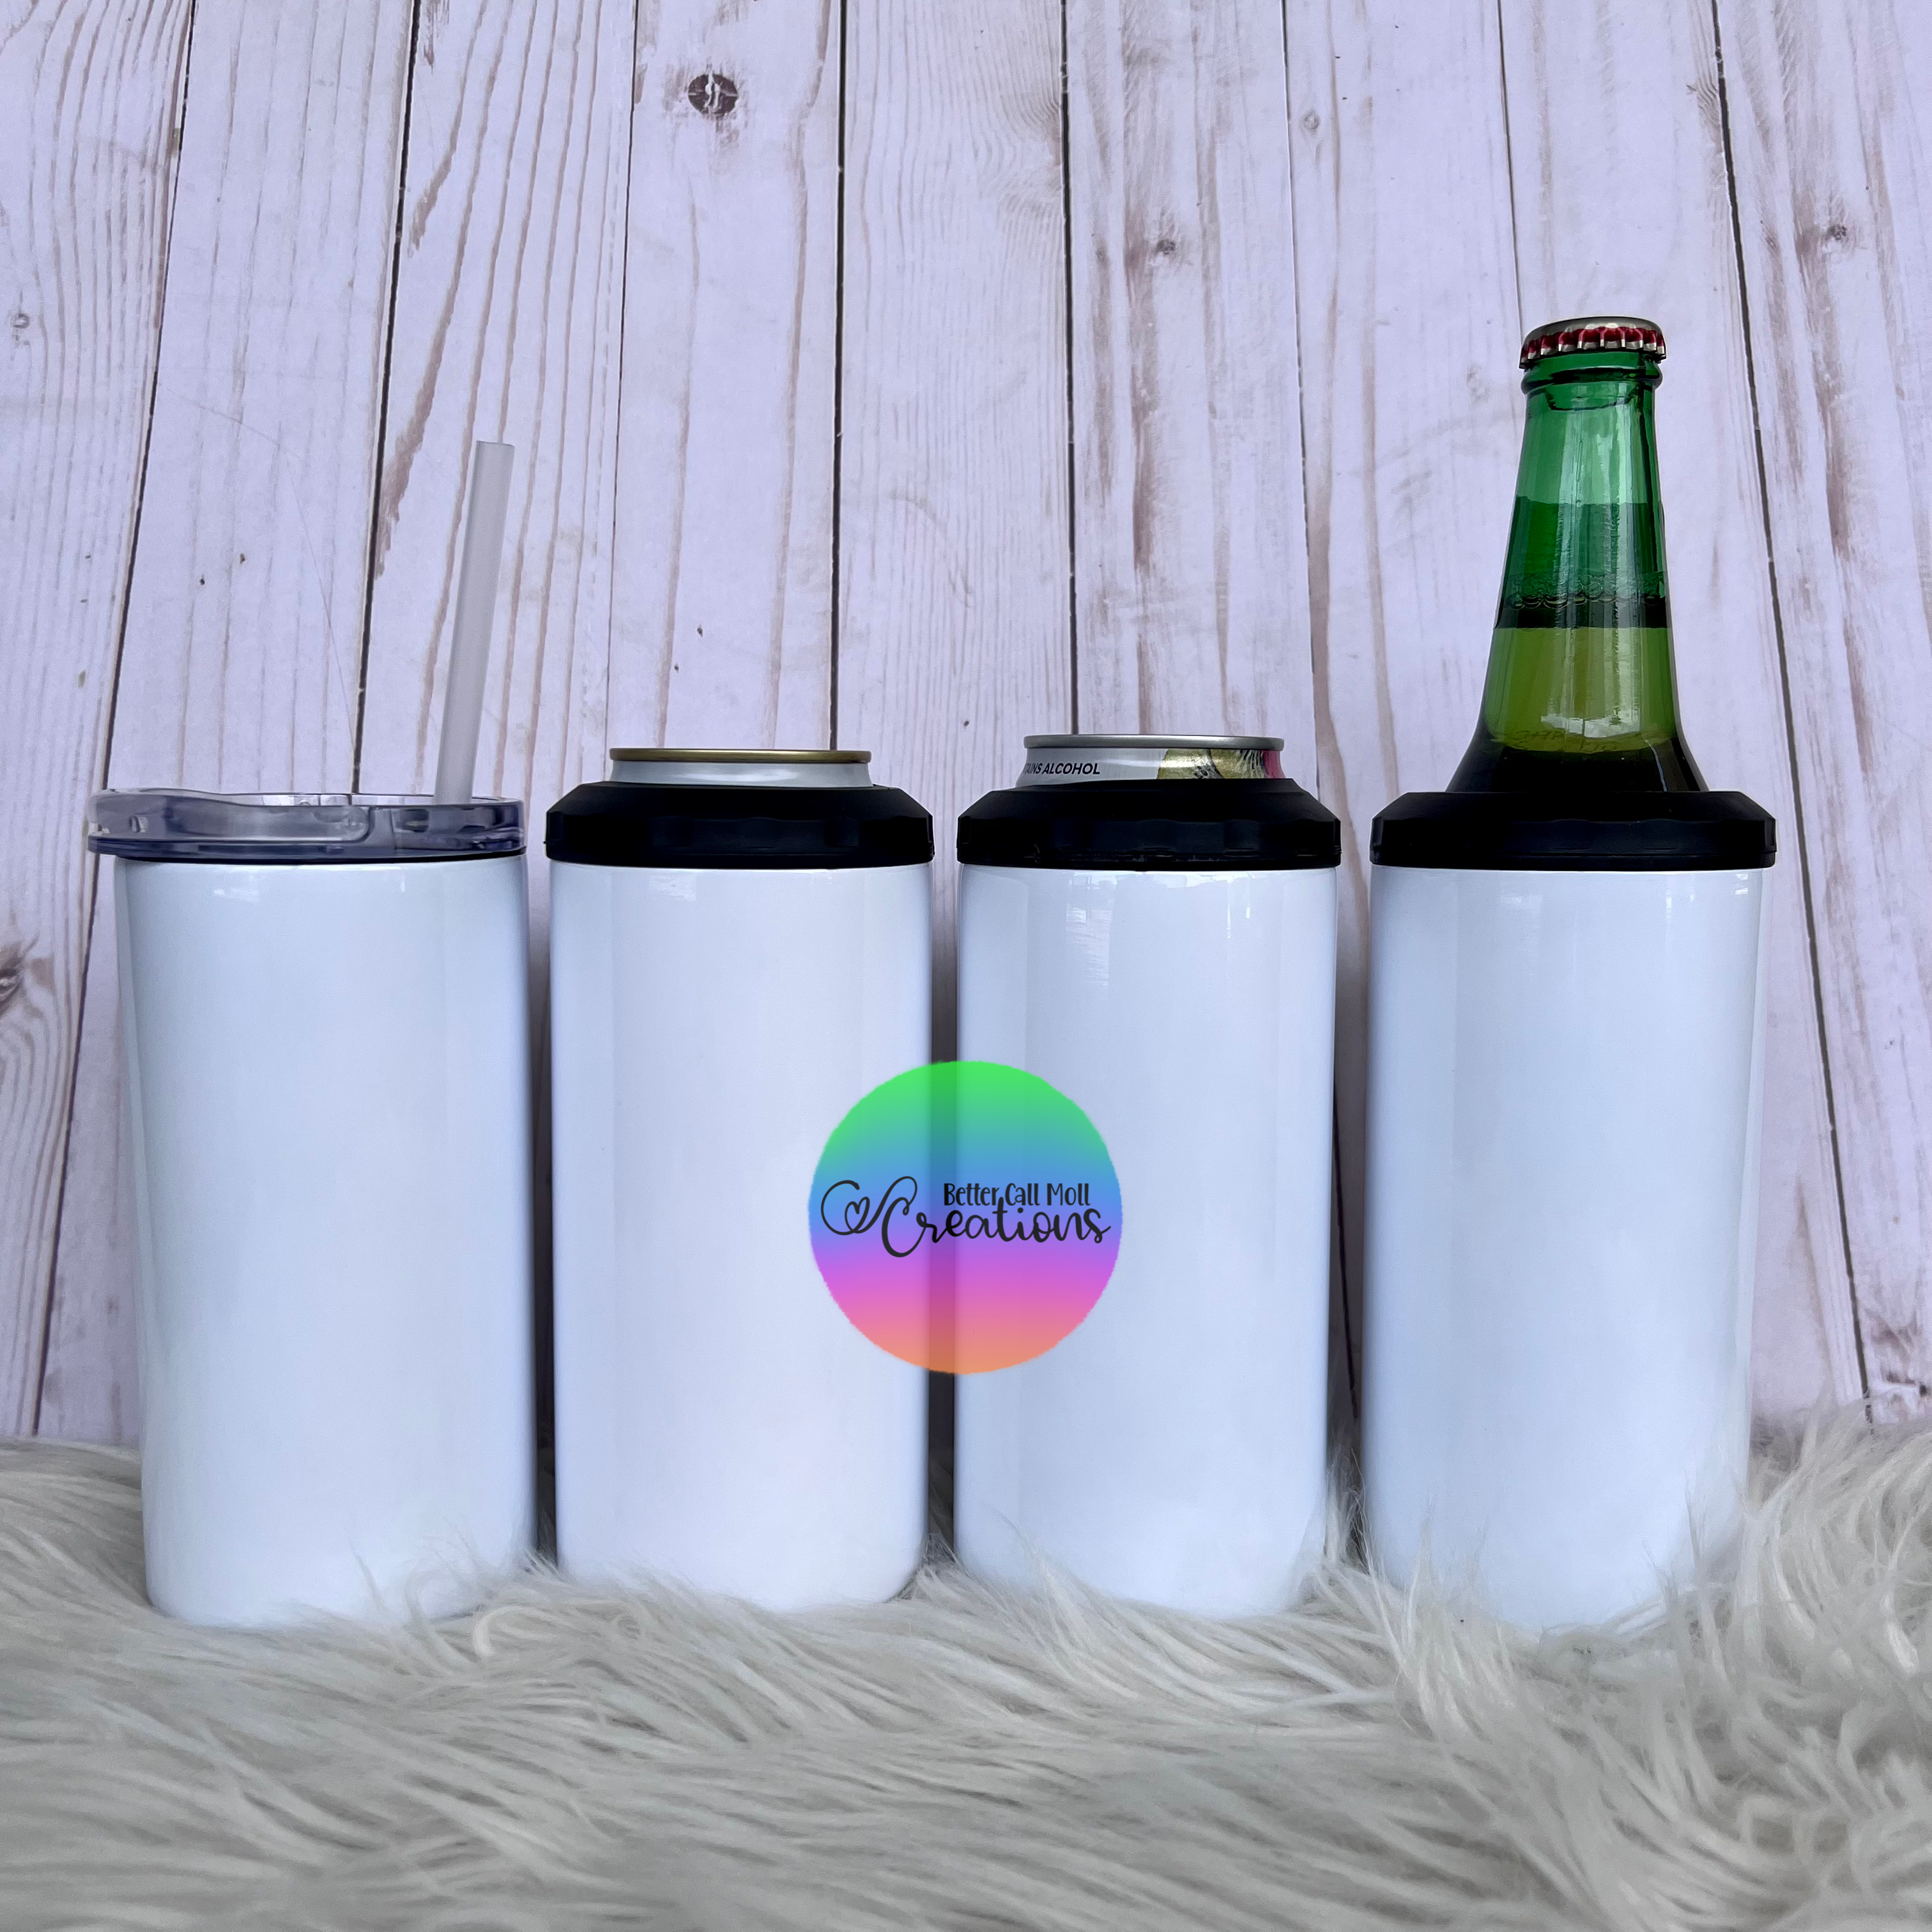 4 in 1 Can Cooler – Stainless Steel Heaven LLC